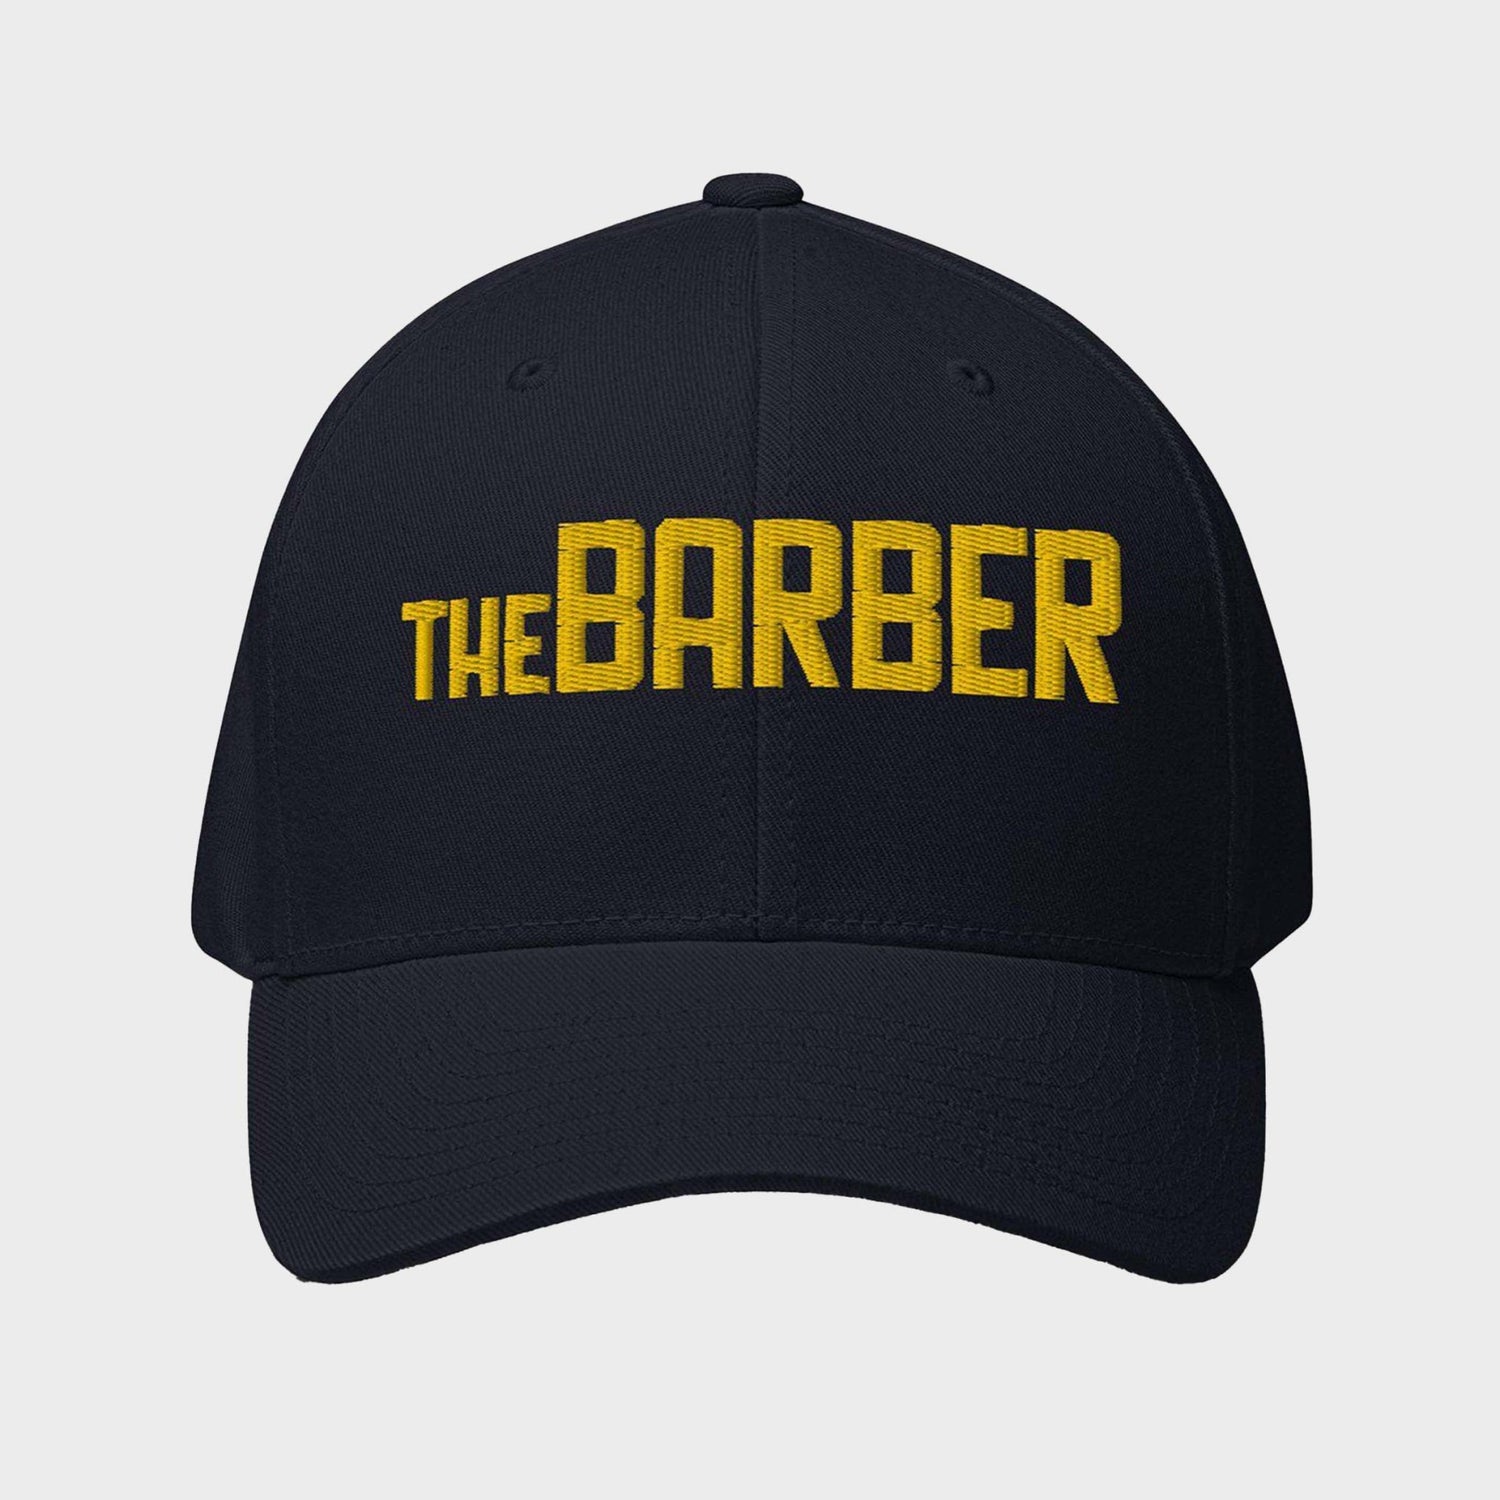 Cap Navy/Gold - The Barber Style